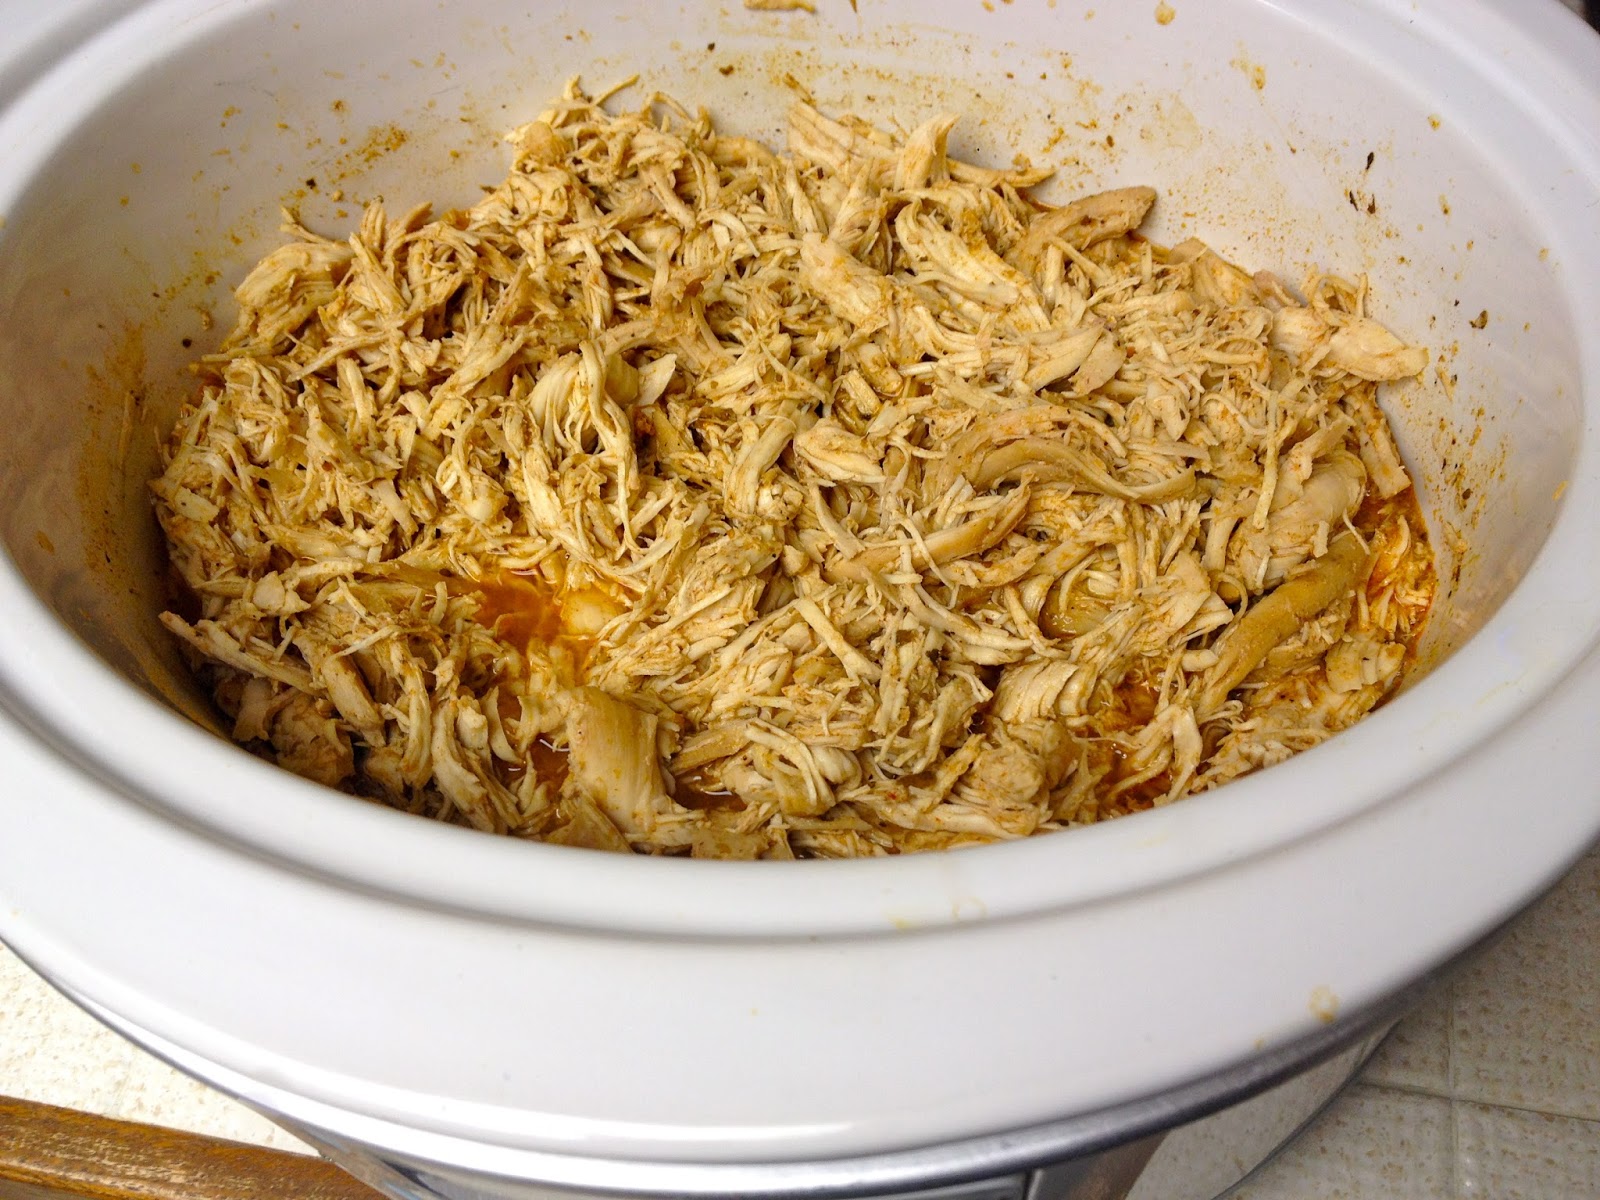 Mexican Shredded Chicken in a Crock Pot